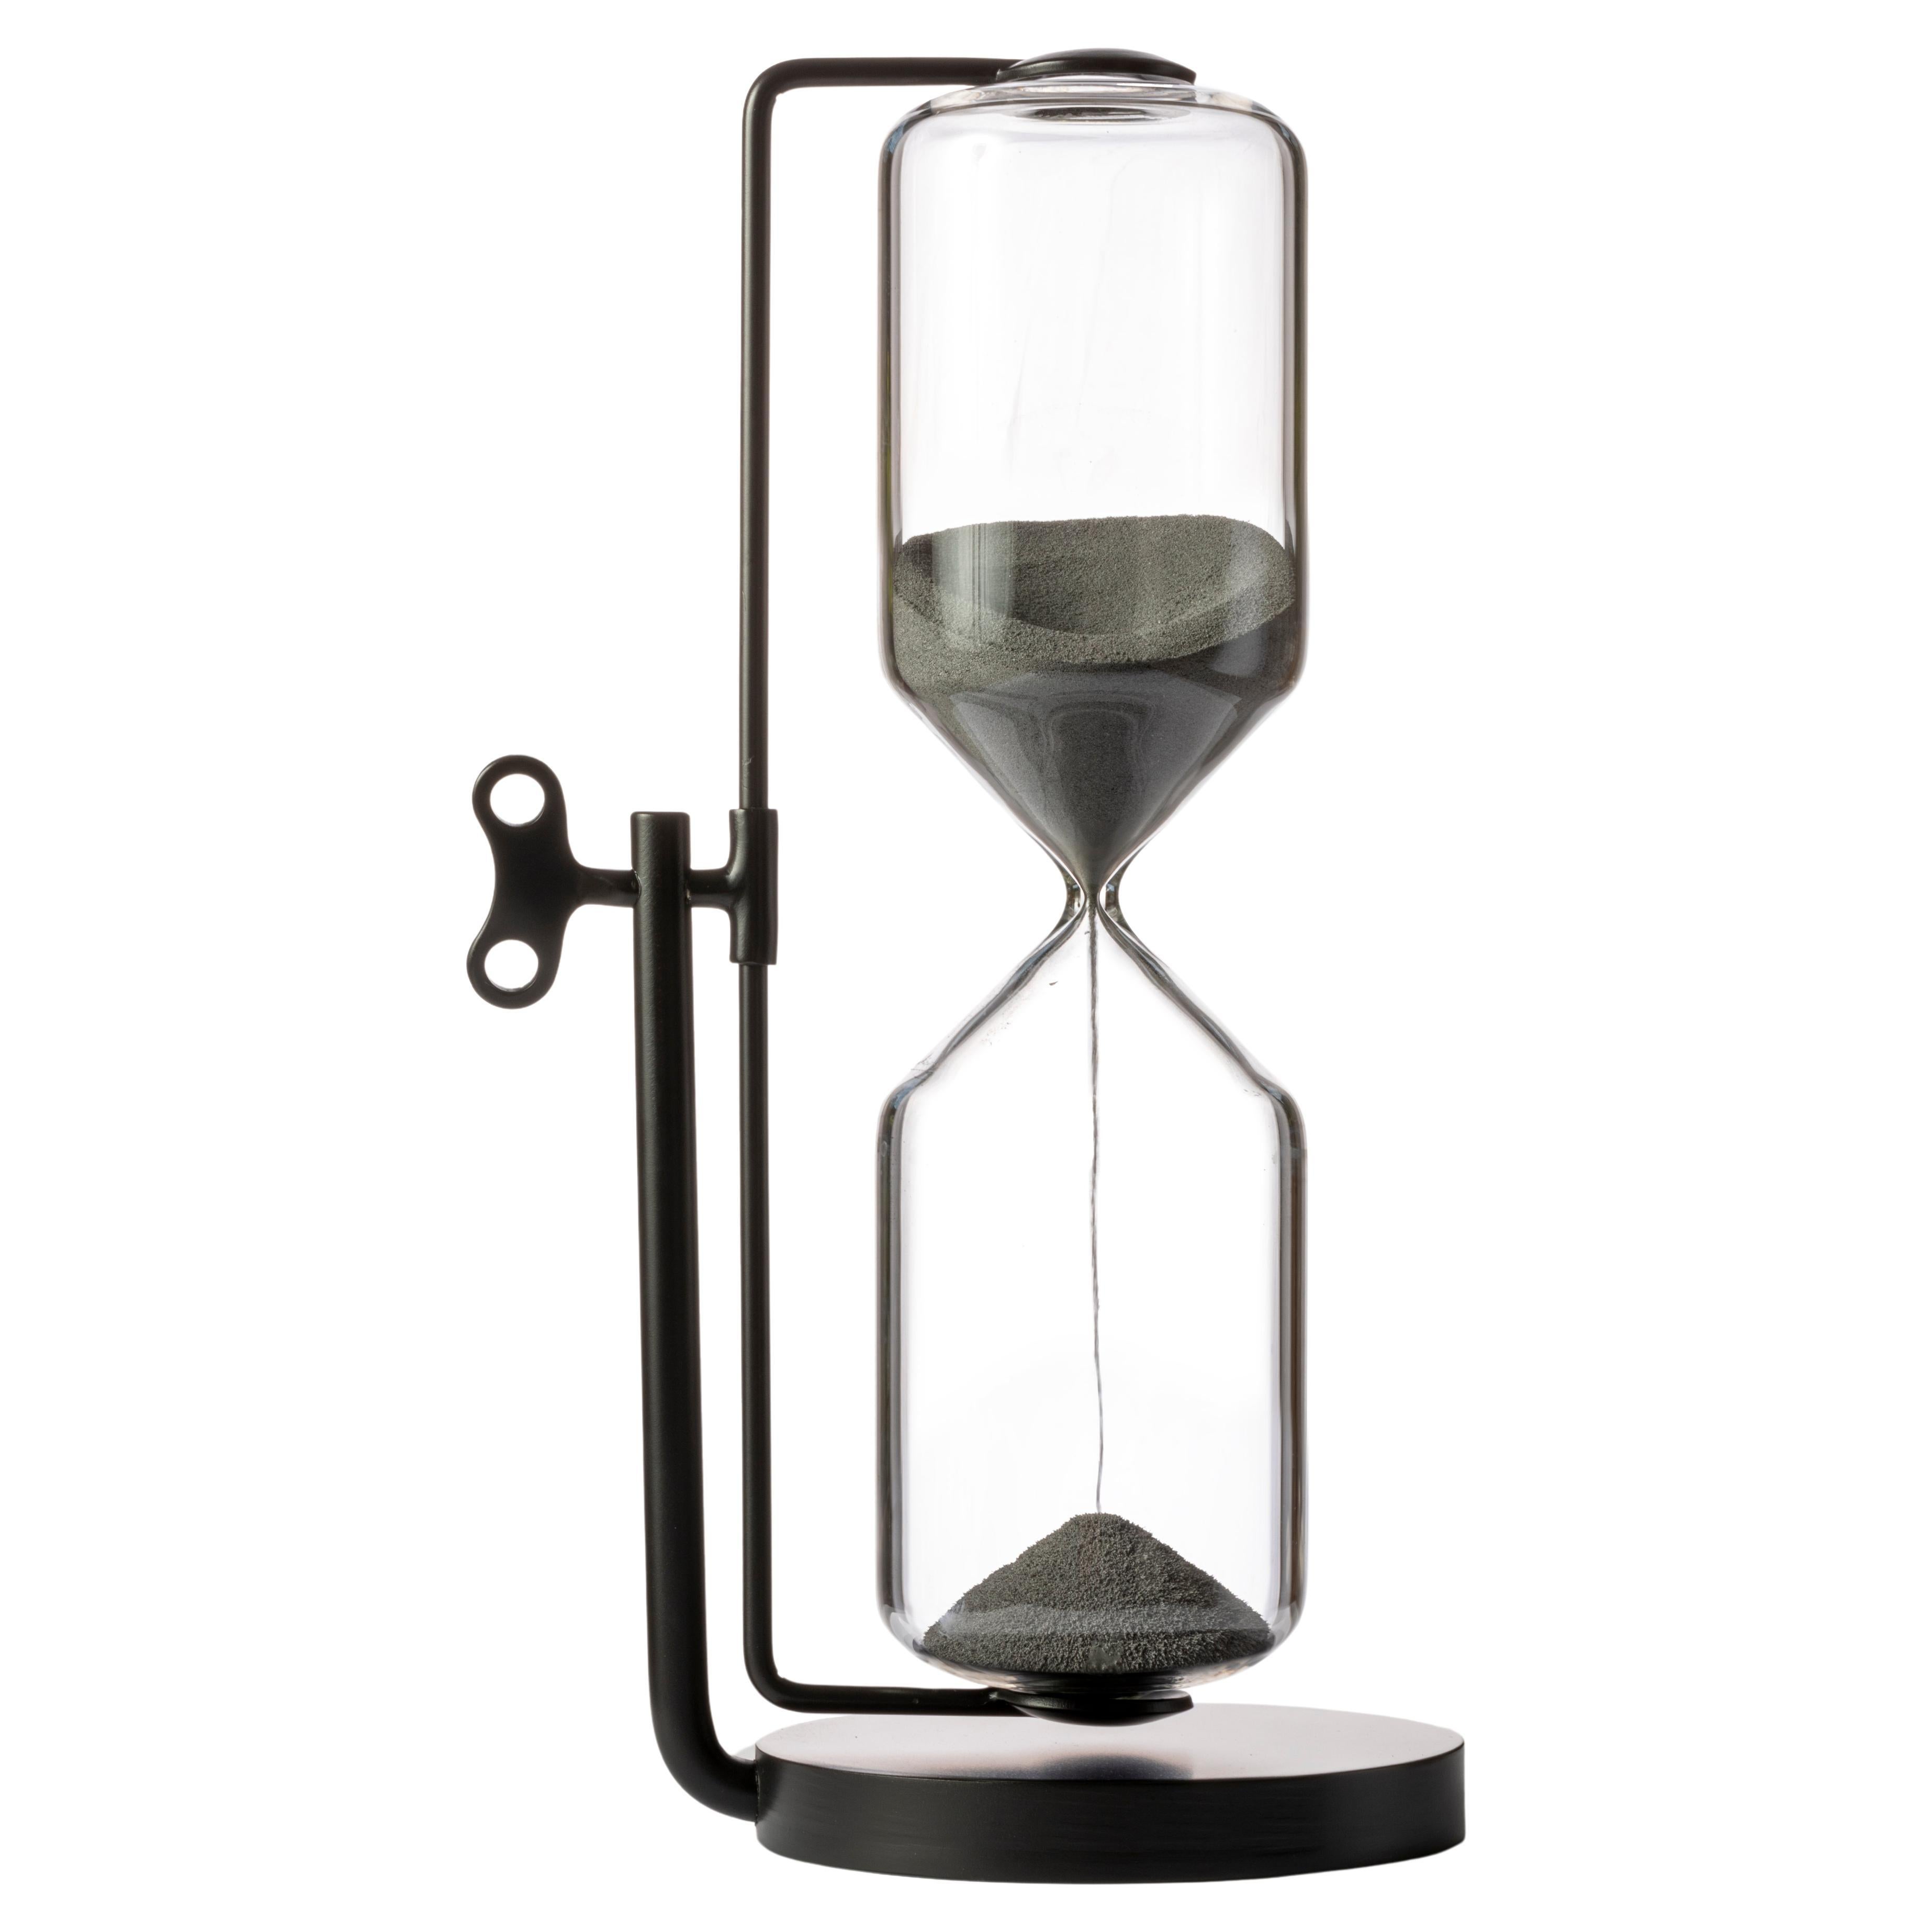 21st Century Hourglass Collectible design object Timeless Black edition 